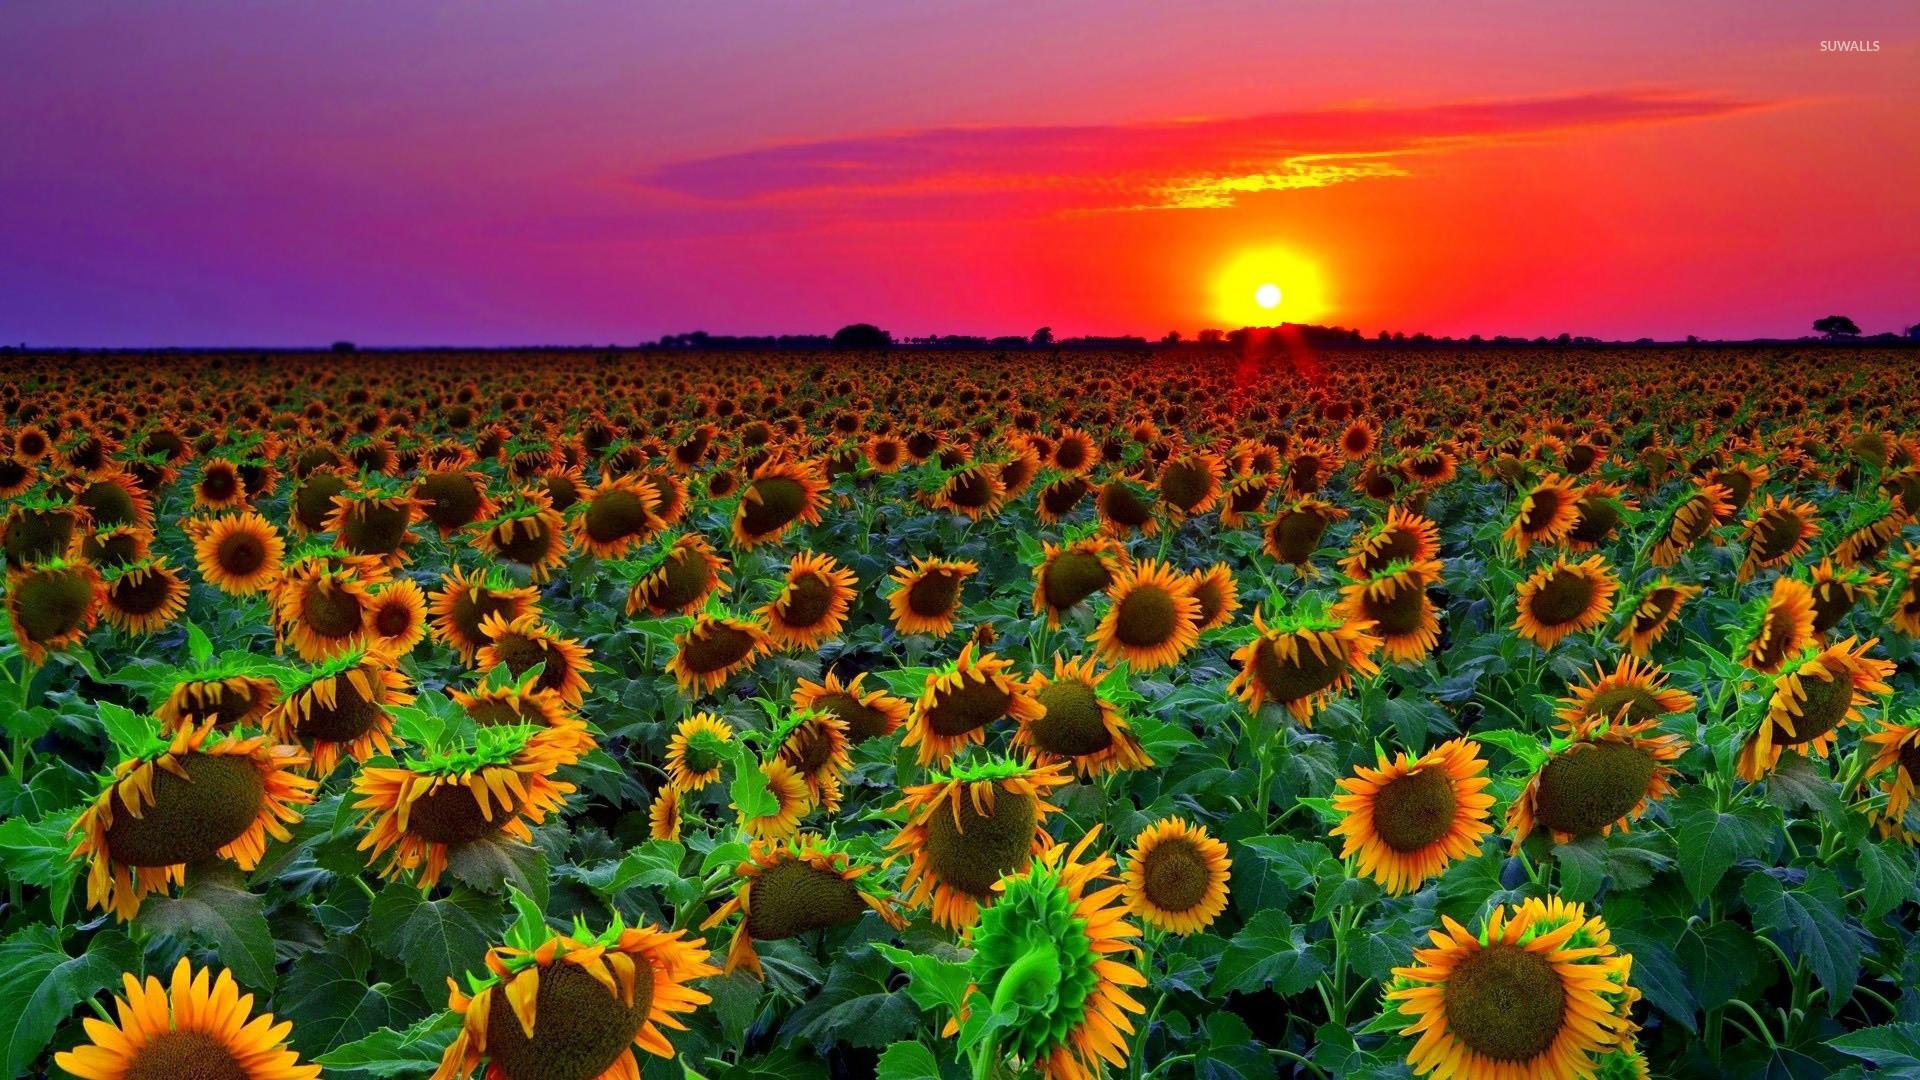 Aesthetic Sunflower Wallpapers - Wallpaper Cave